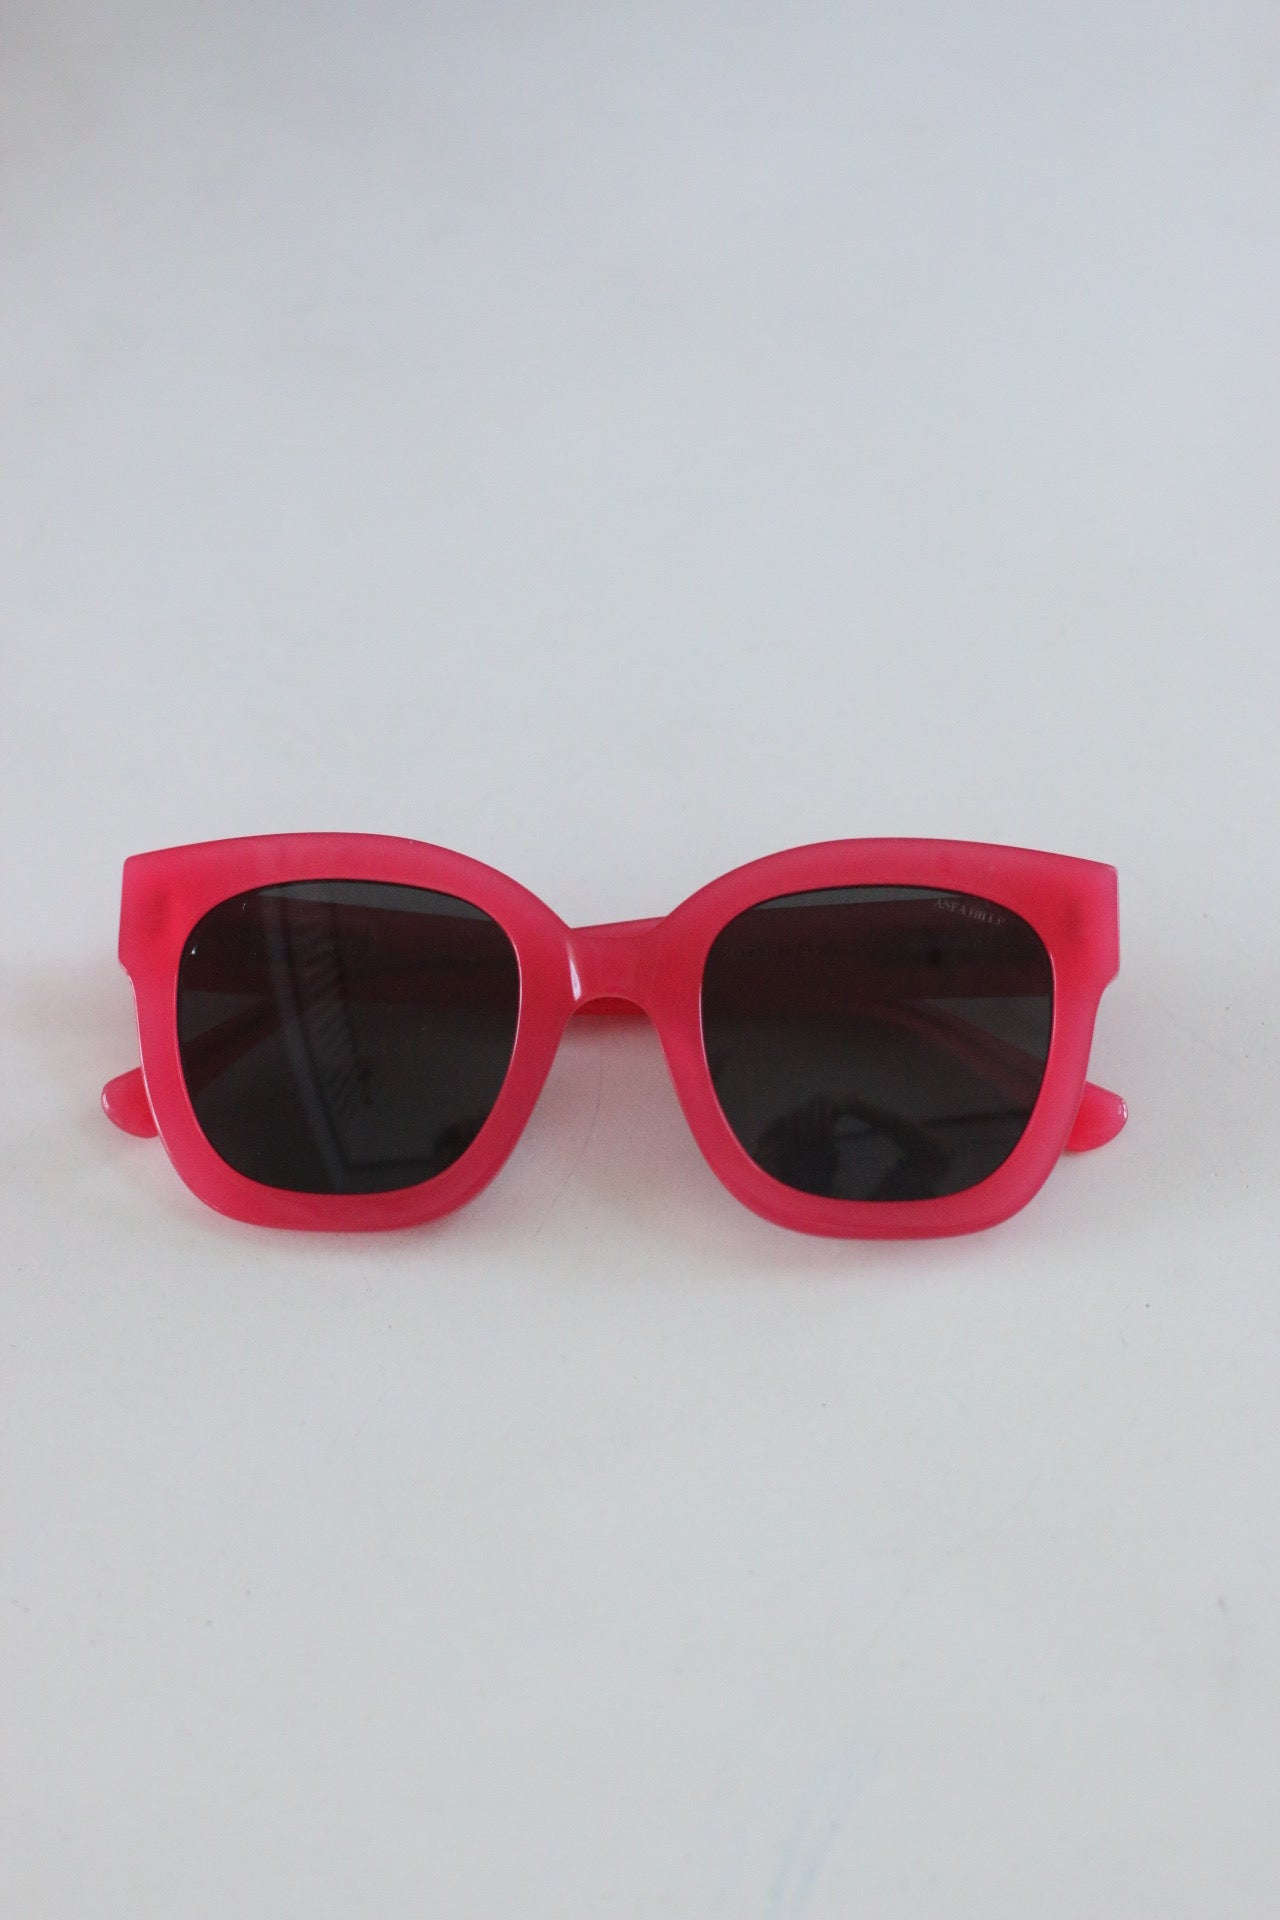 Sundown Pink Sunglasses - Embrace the charm of Texas sunsets in every moment.